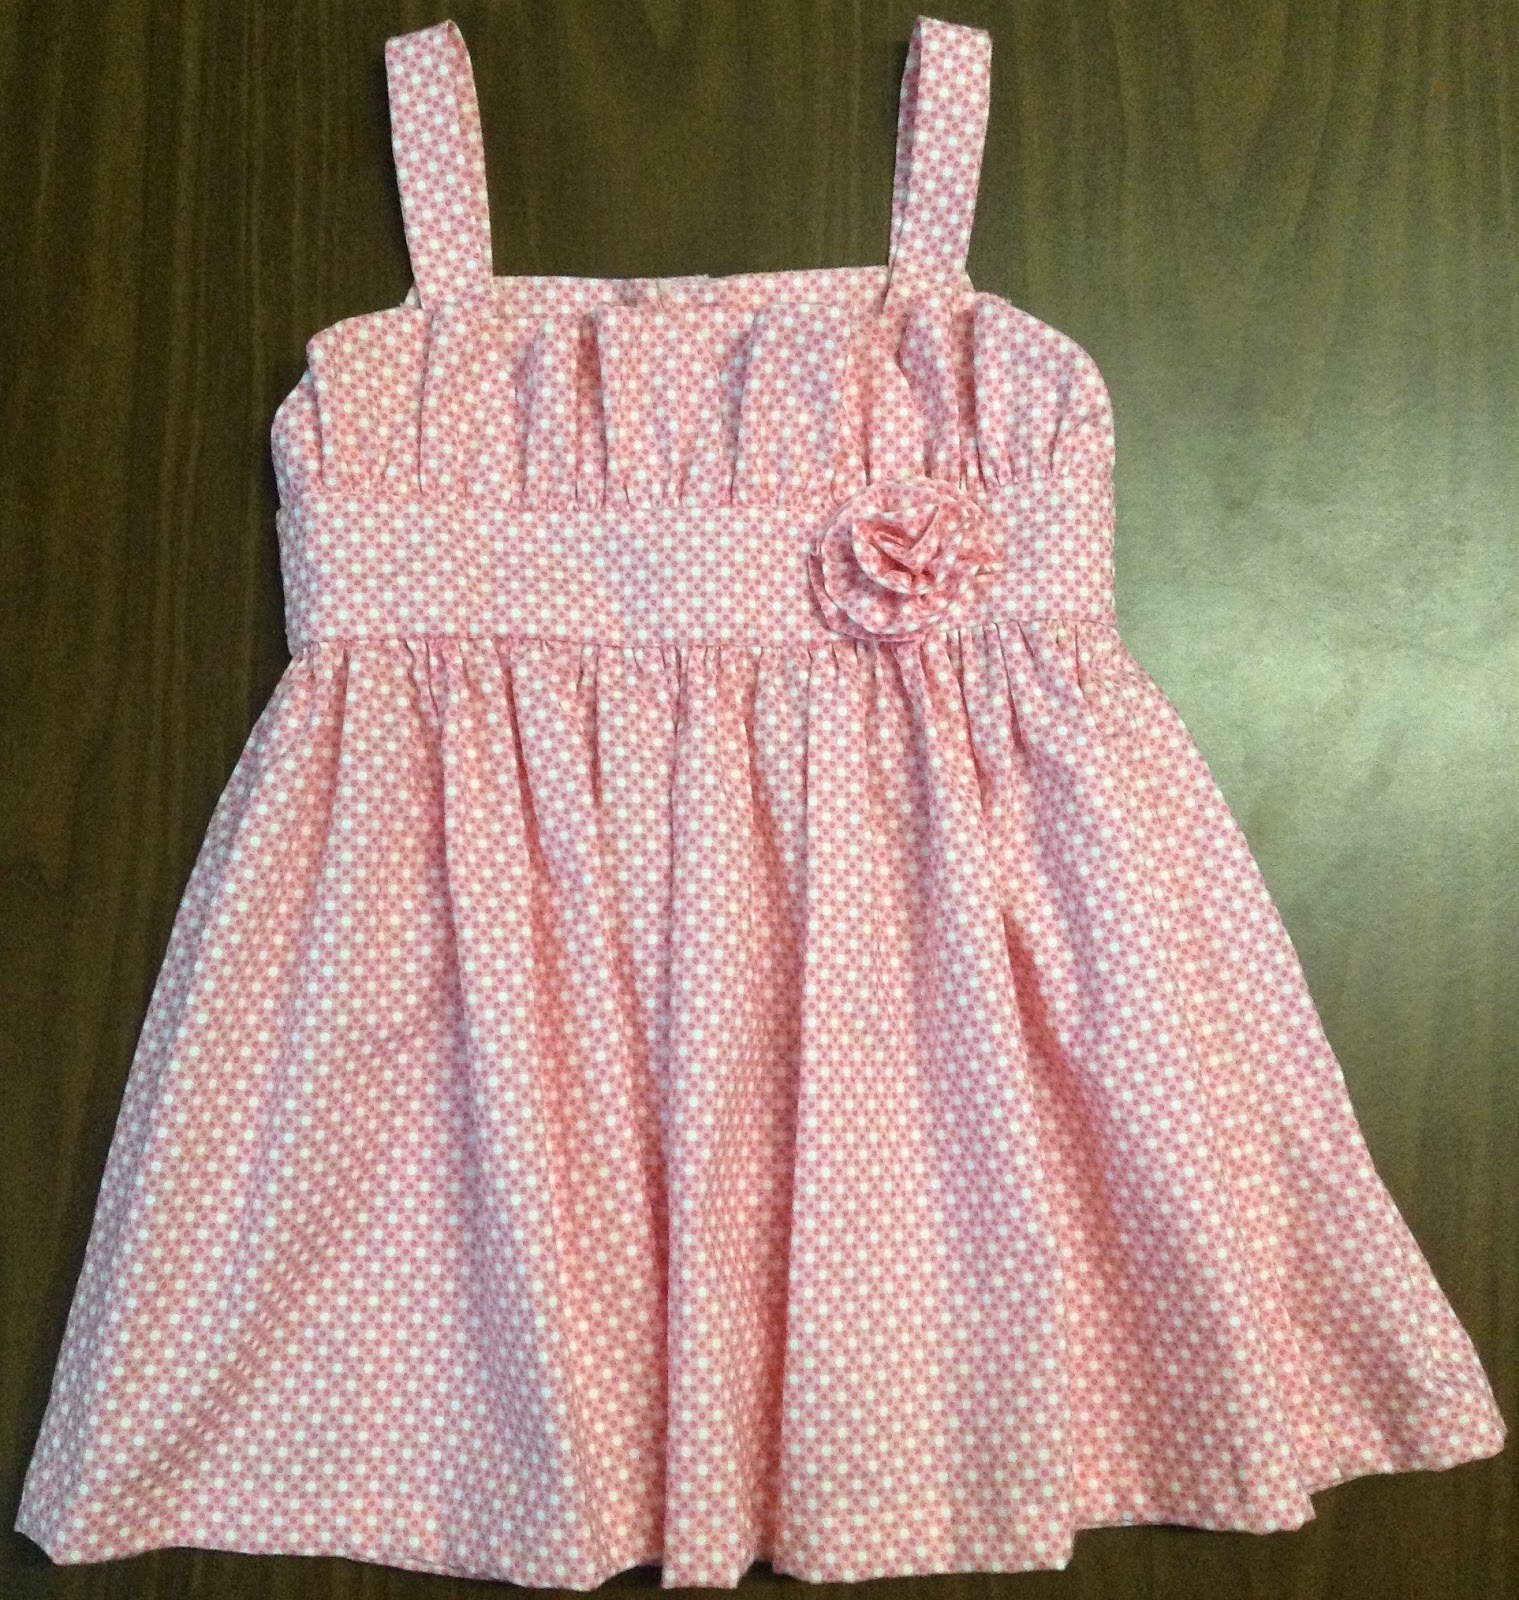 Show Me Sewing: Little Girl's Pink Dim Dots Dress - Trenna